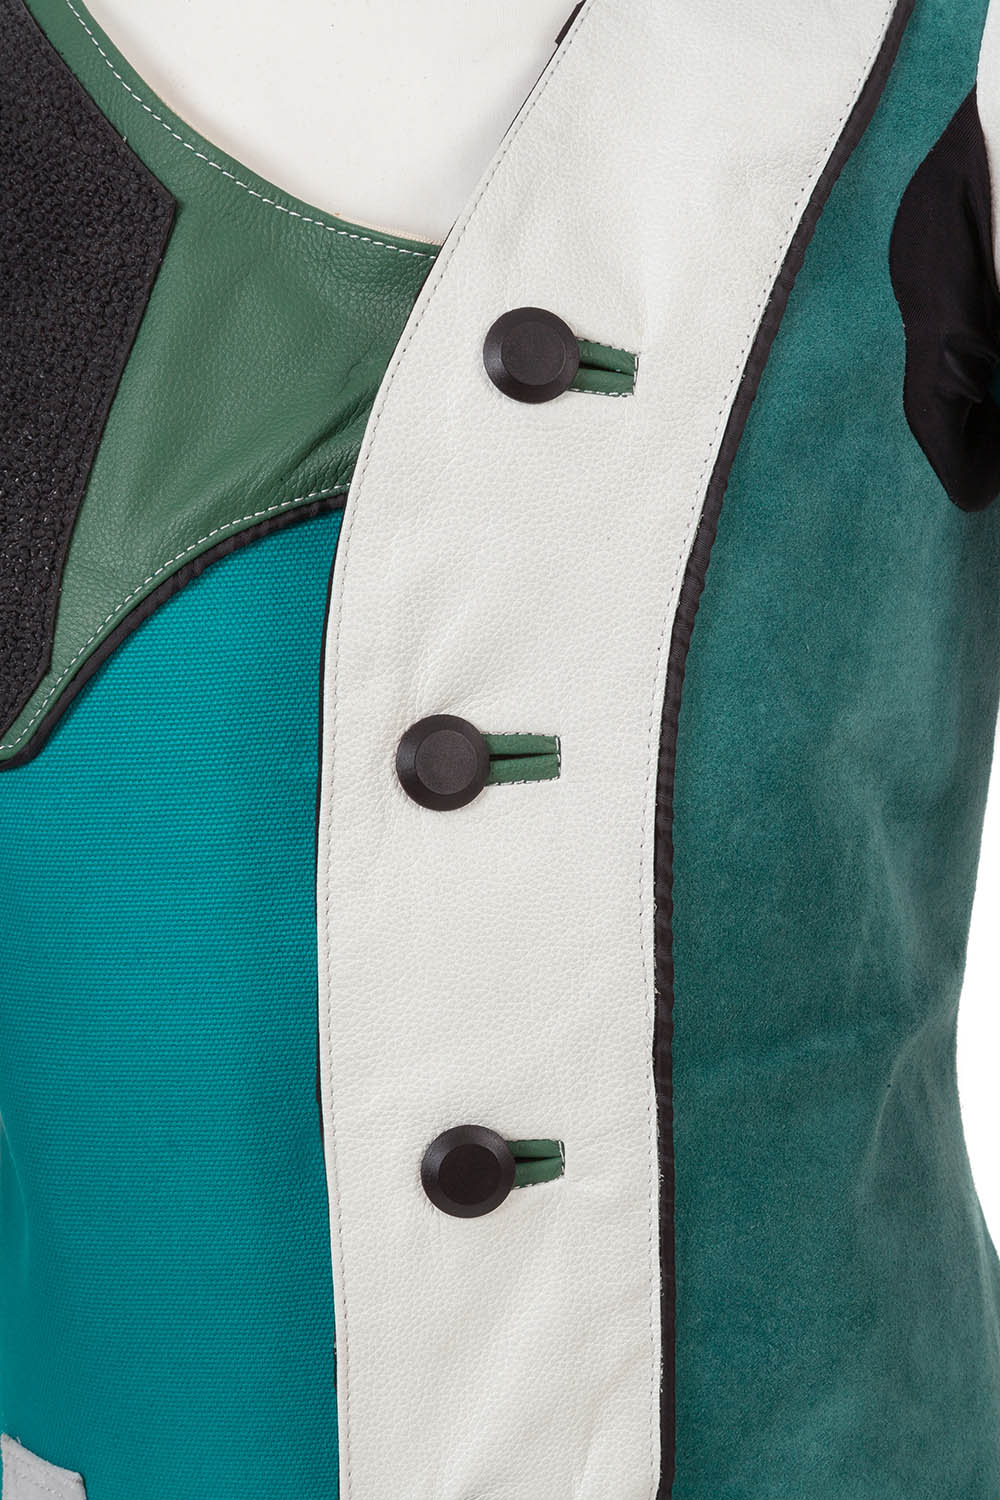 Heavy-duty button fastenings and leather reinforced button holes - Centaur Match 19 Double Canvas and Leather Target Shooting Jacket